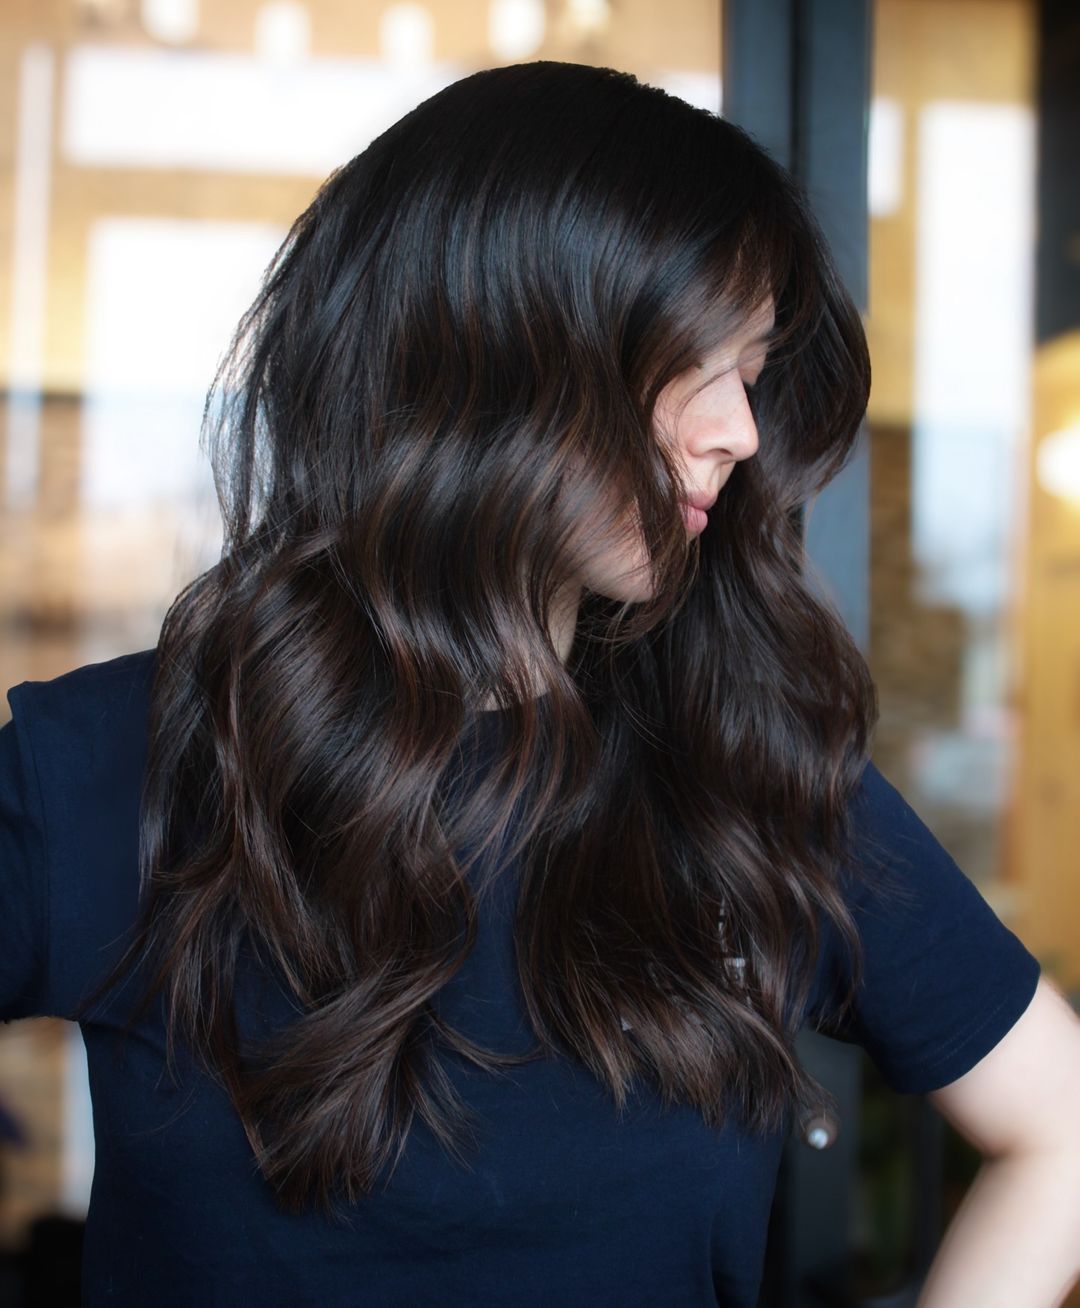 Fall Hair Color for Brunettes: 27 Stunning Ideas for a Gorgeous Look